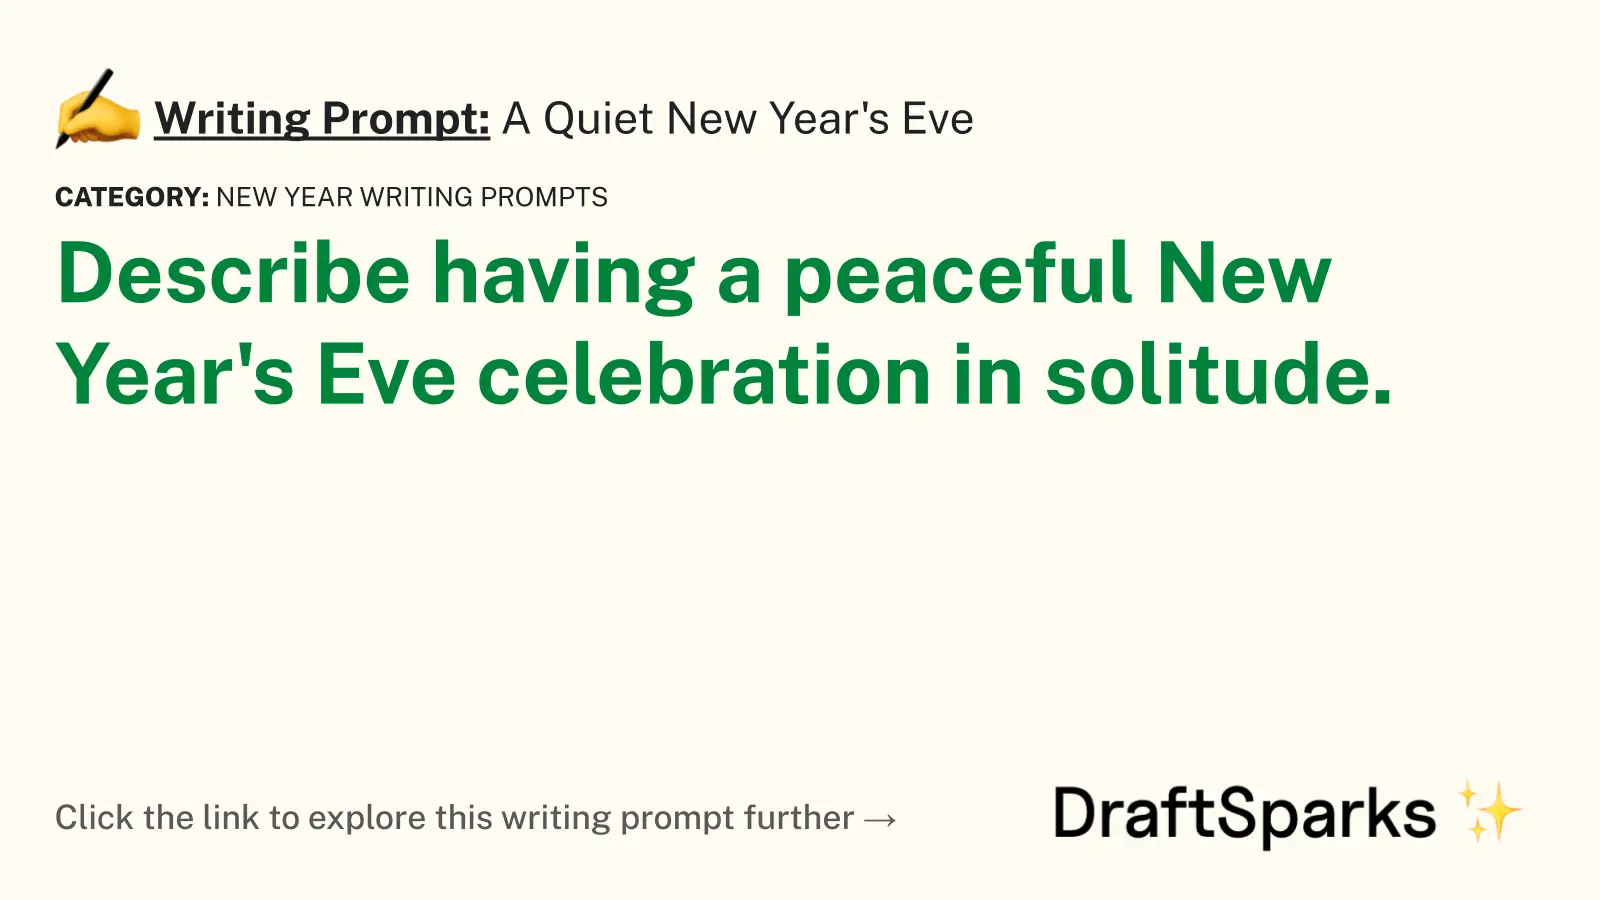 A Quiet New Year’s Eve